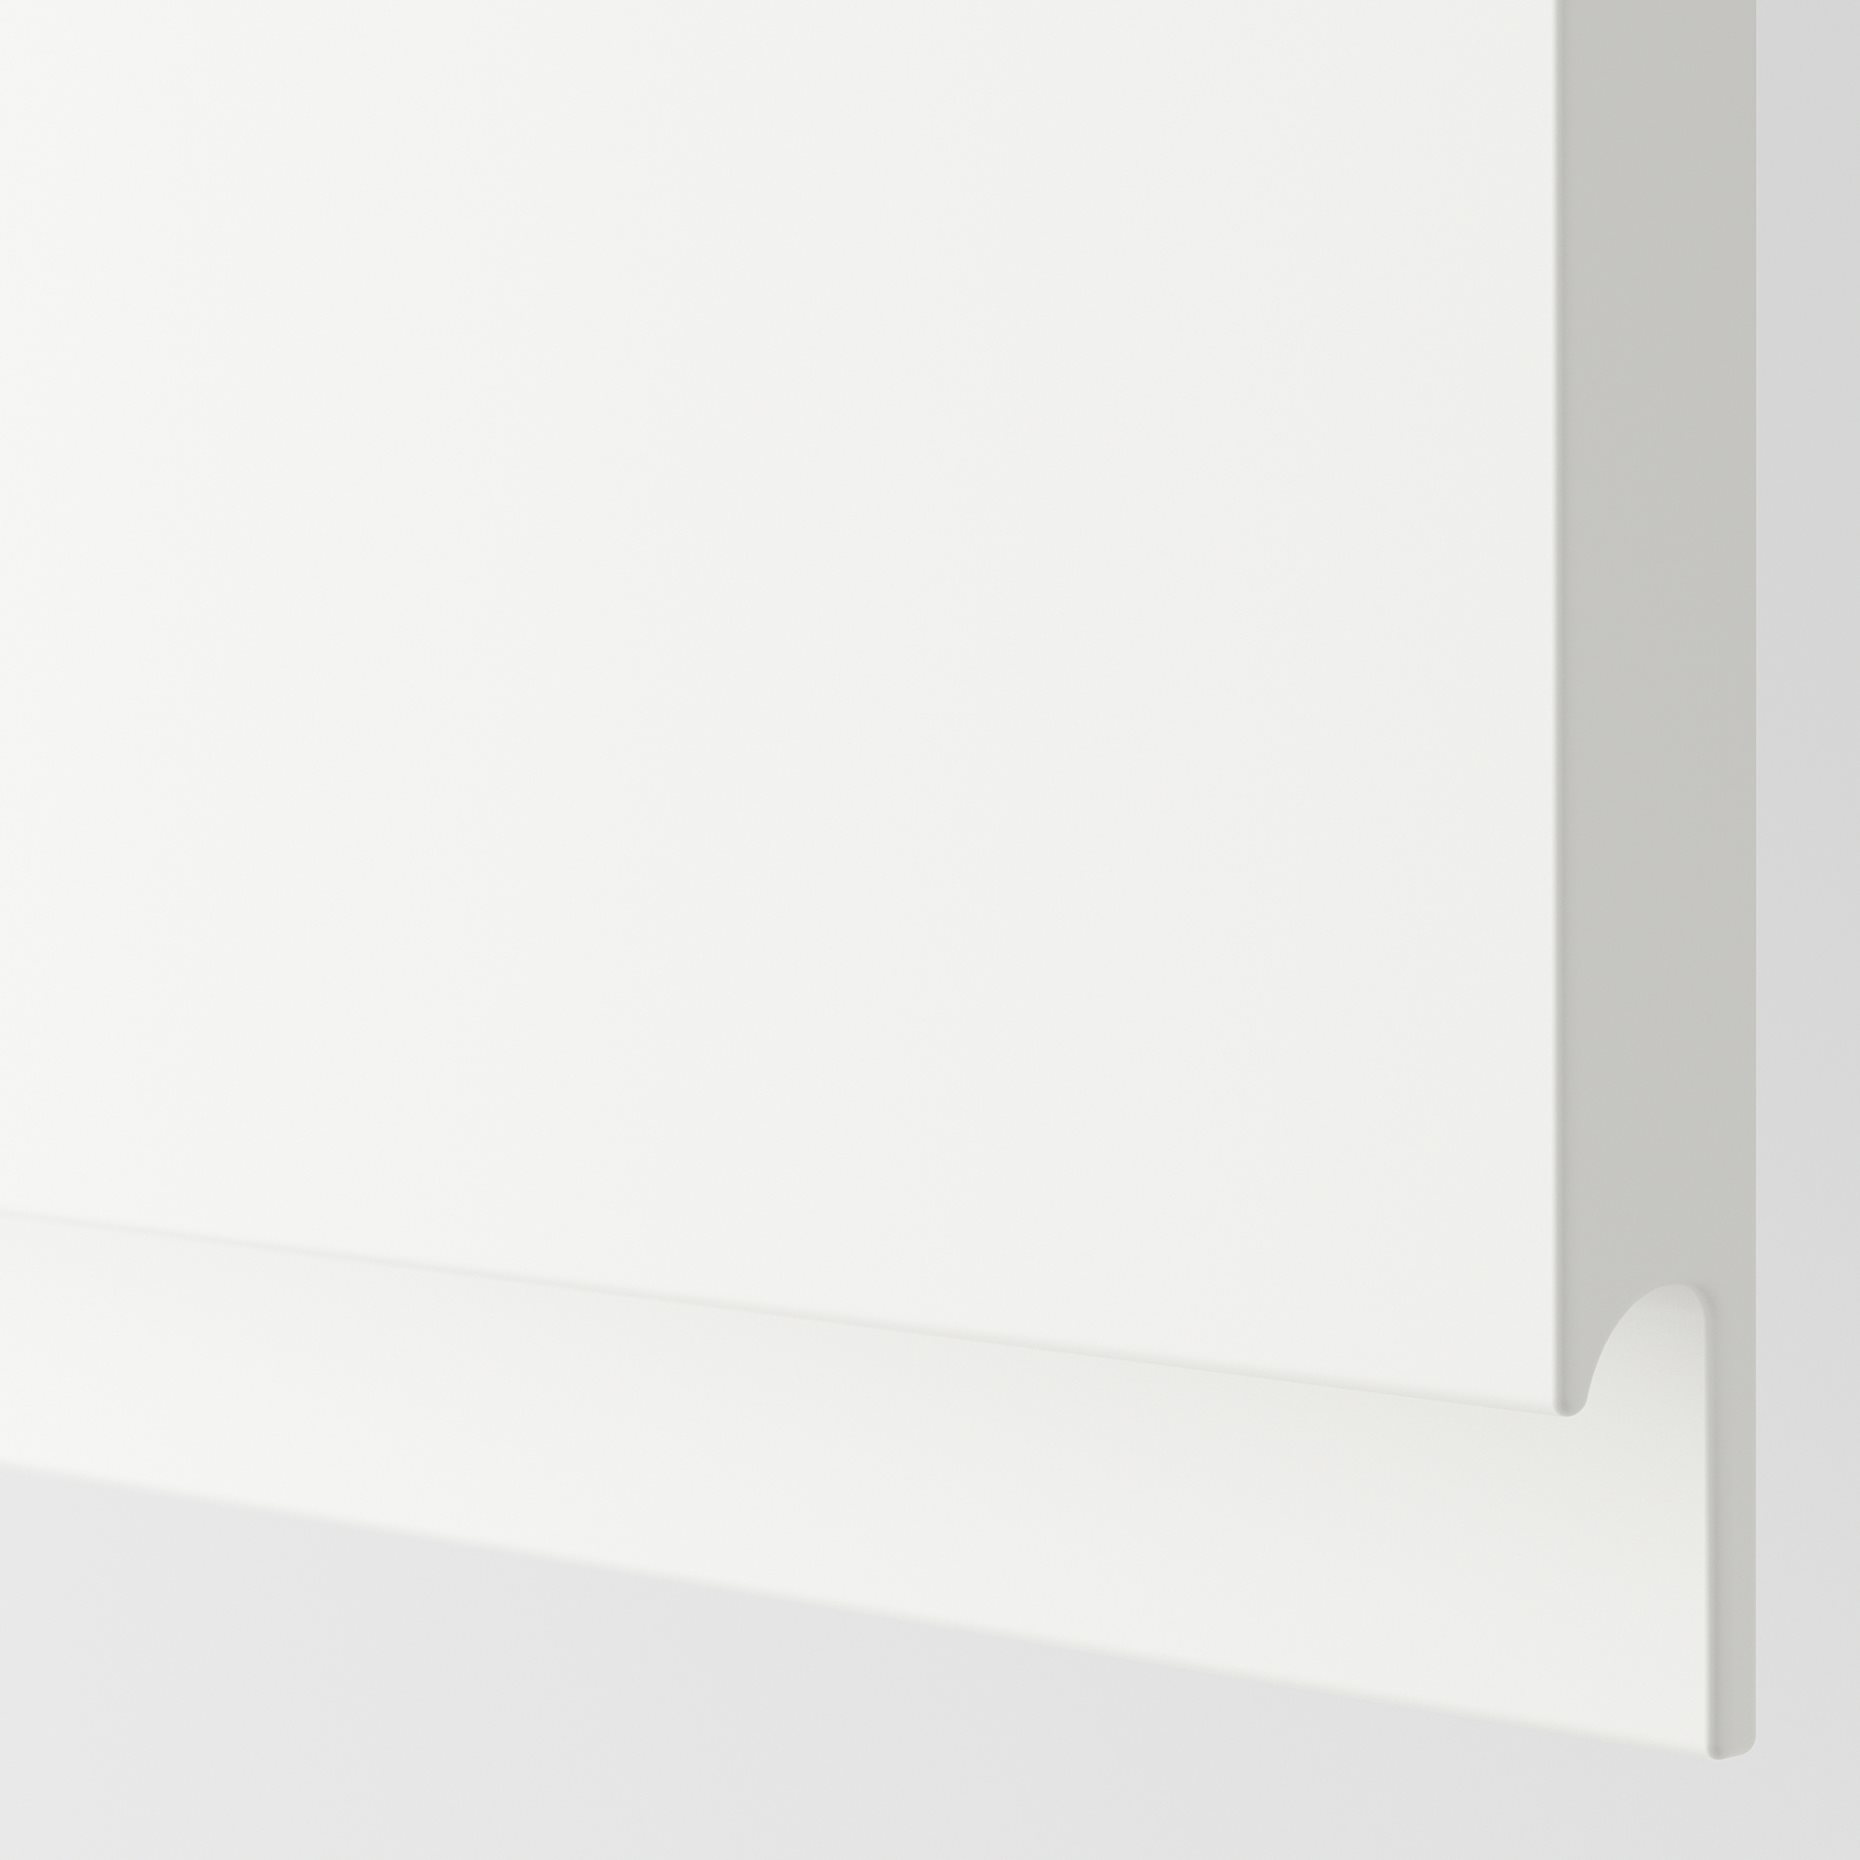 METOD, wall cabinet with shelves, 40x60 cm, 294.568.72